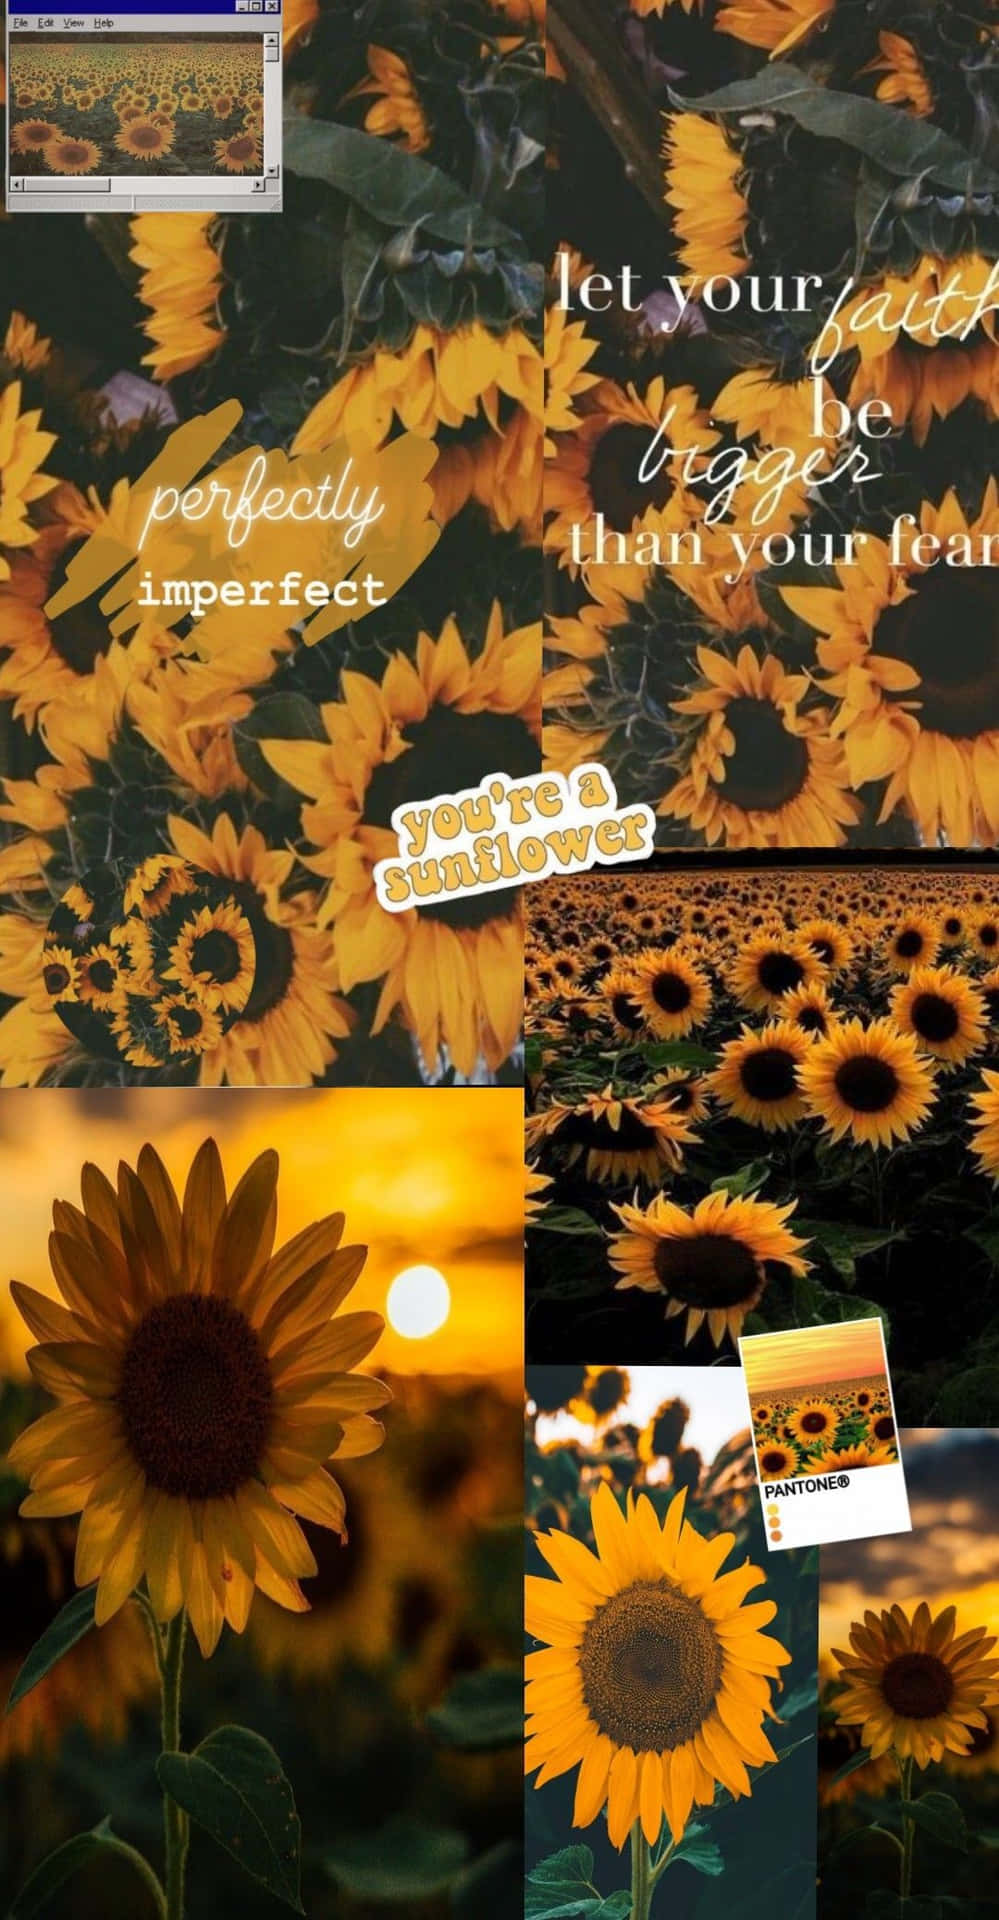 A brilliant sunflower glows in a field of golden yellow. Wallpaper